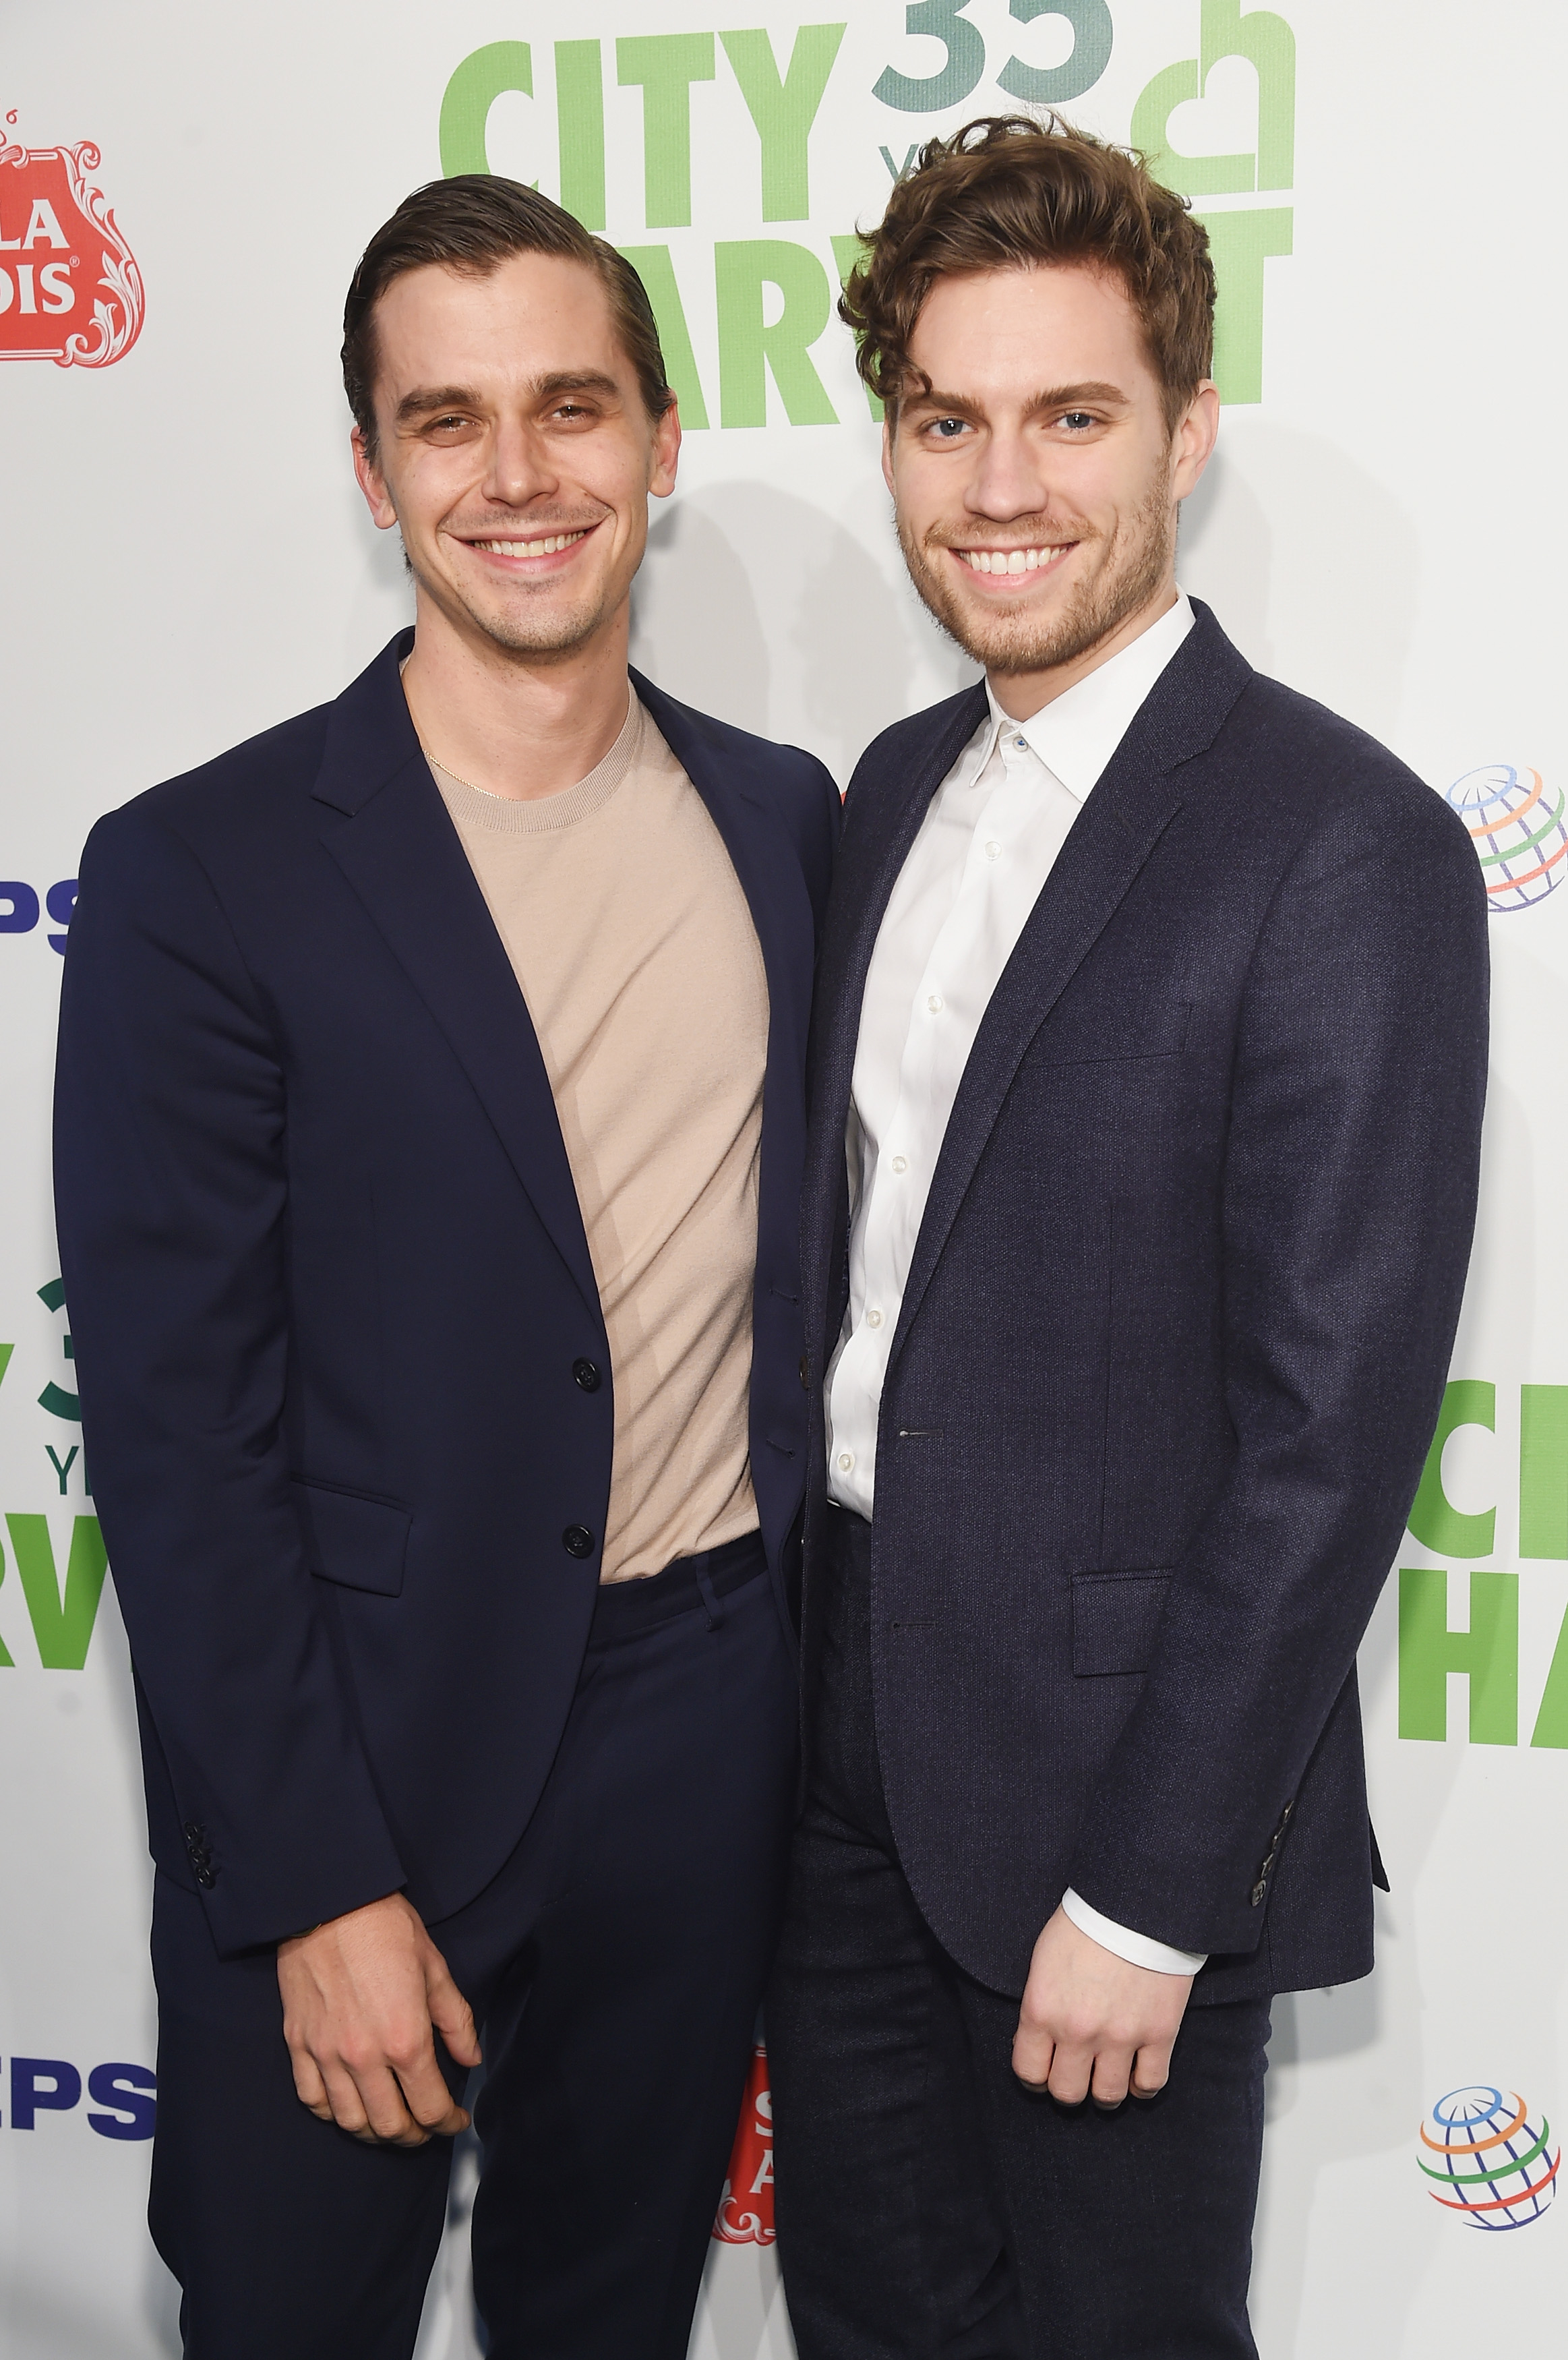 Antoni and Joey smiling at a media event